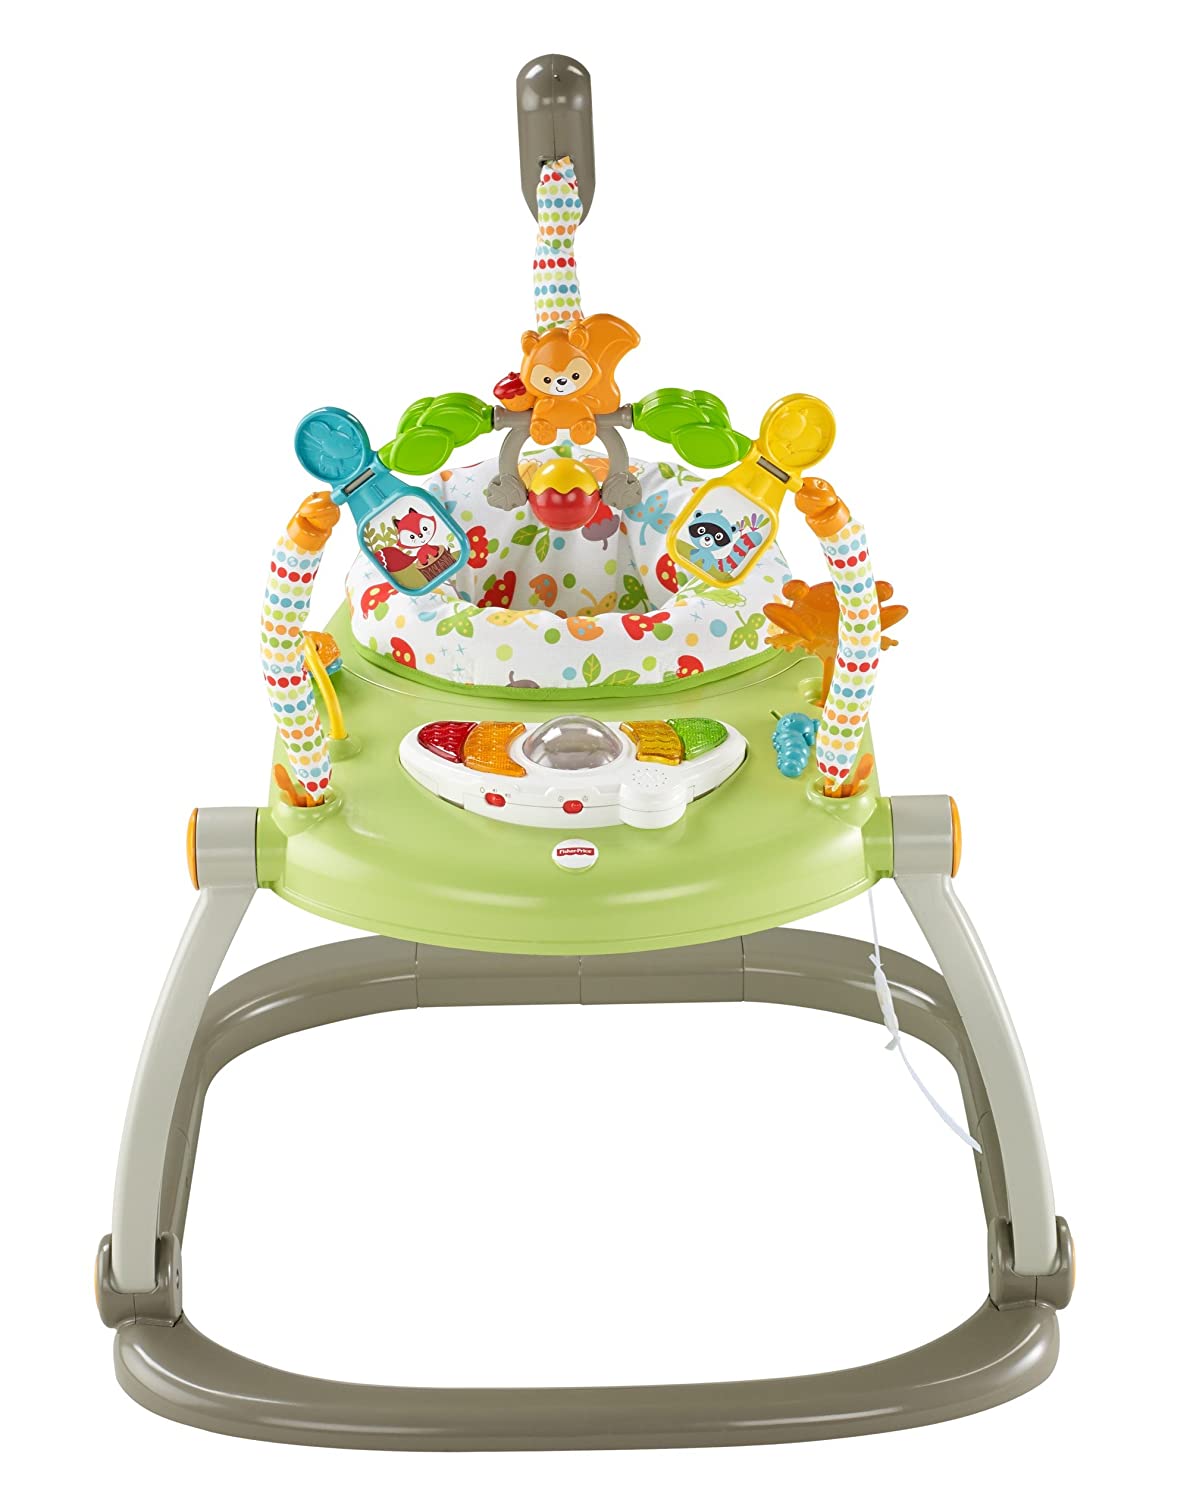 7 Best Fisher Price Jumperoo Reviews in 2023 5